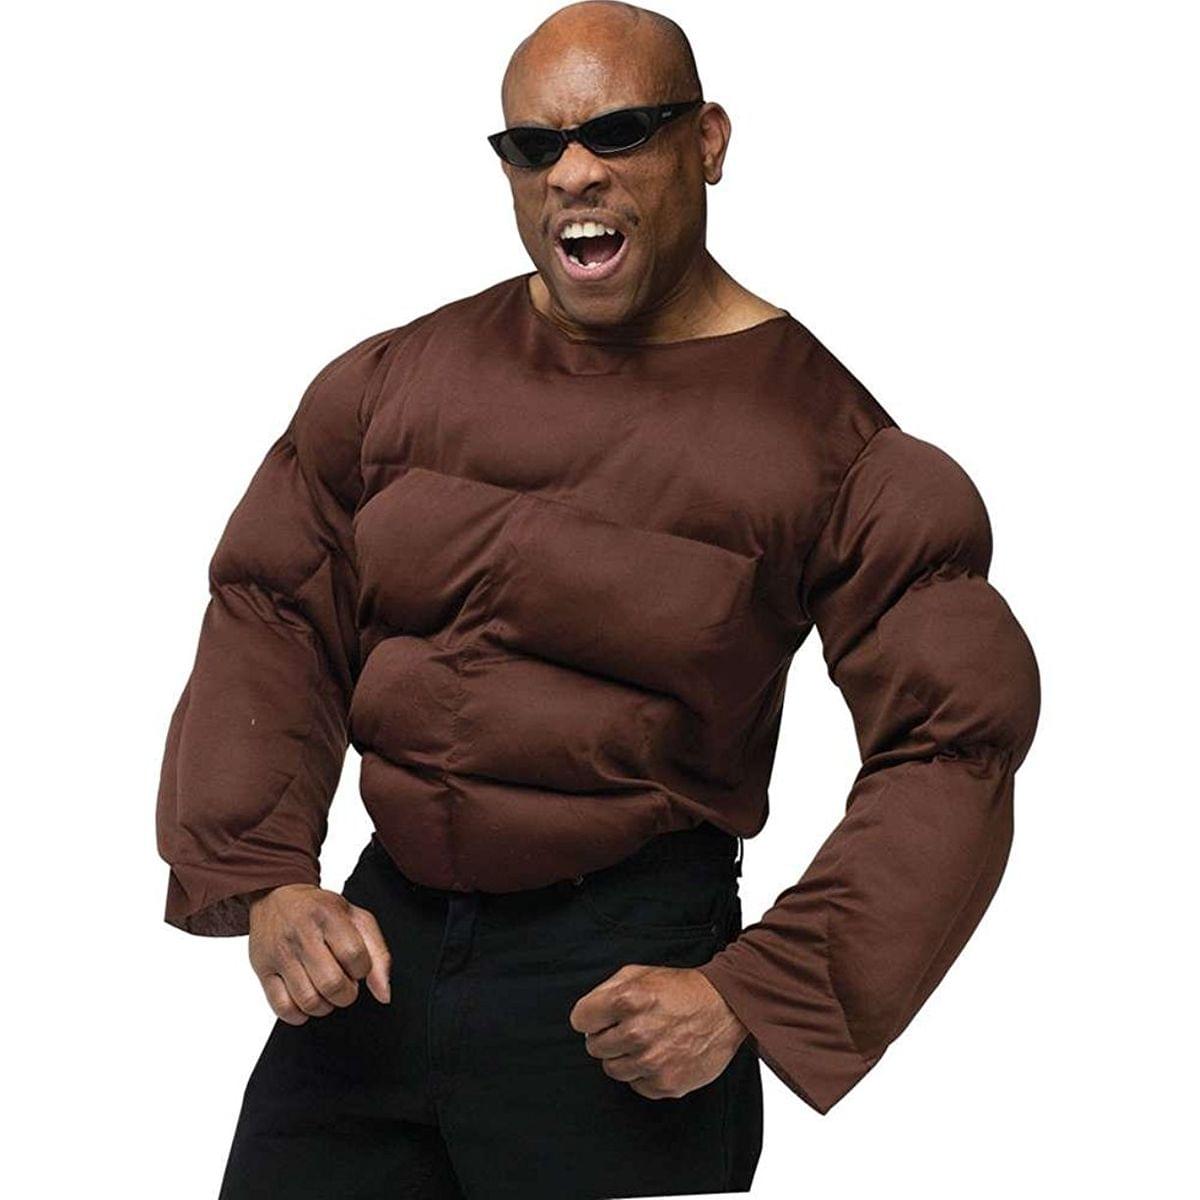 Muscle Chest African American Adult Costume